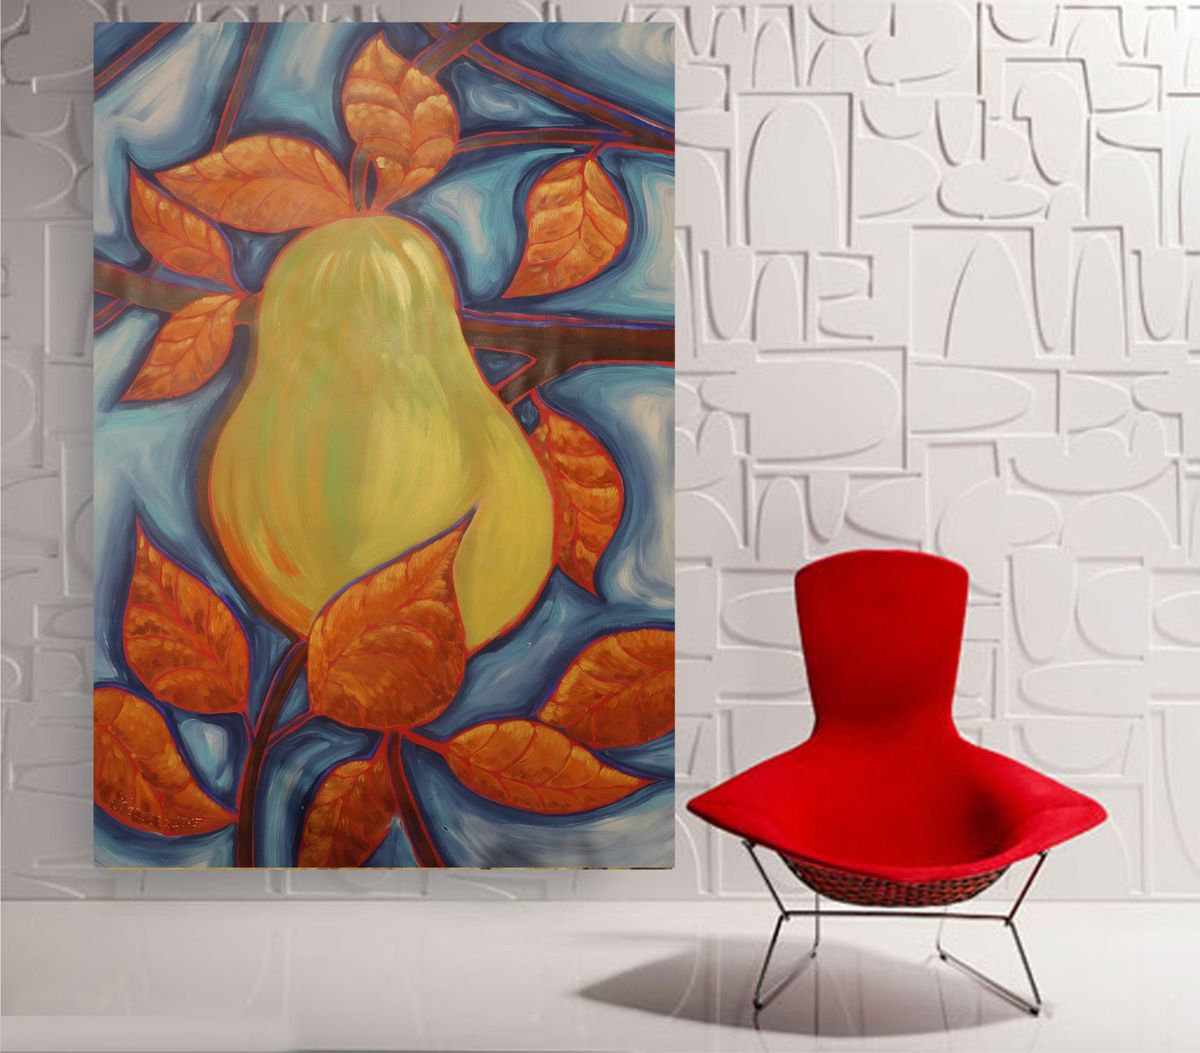 Huge yellow pear on the brunch B053 expressionist acrylic Large painting 110x160 cm unstre... by Ksavera